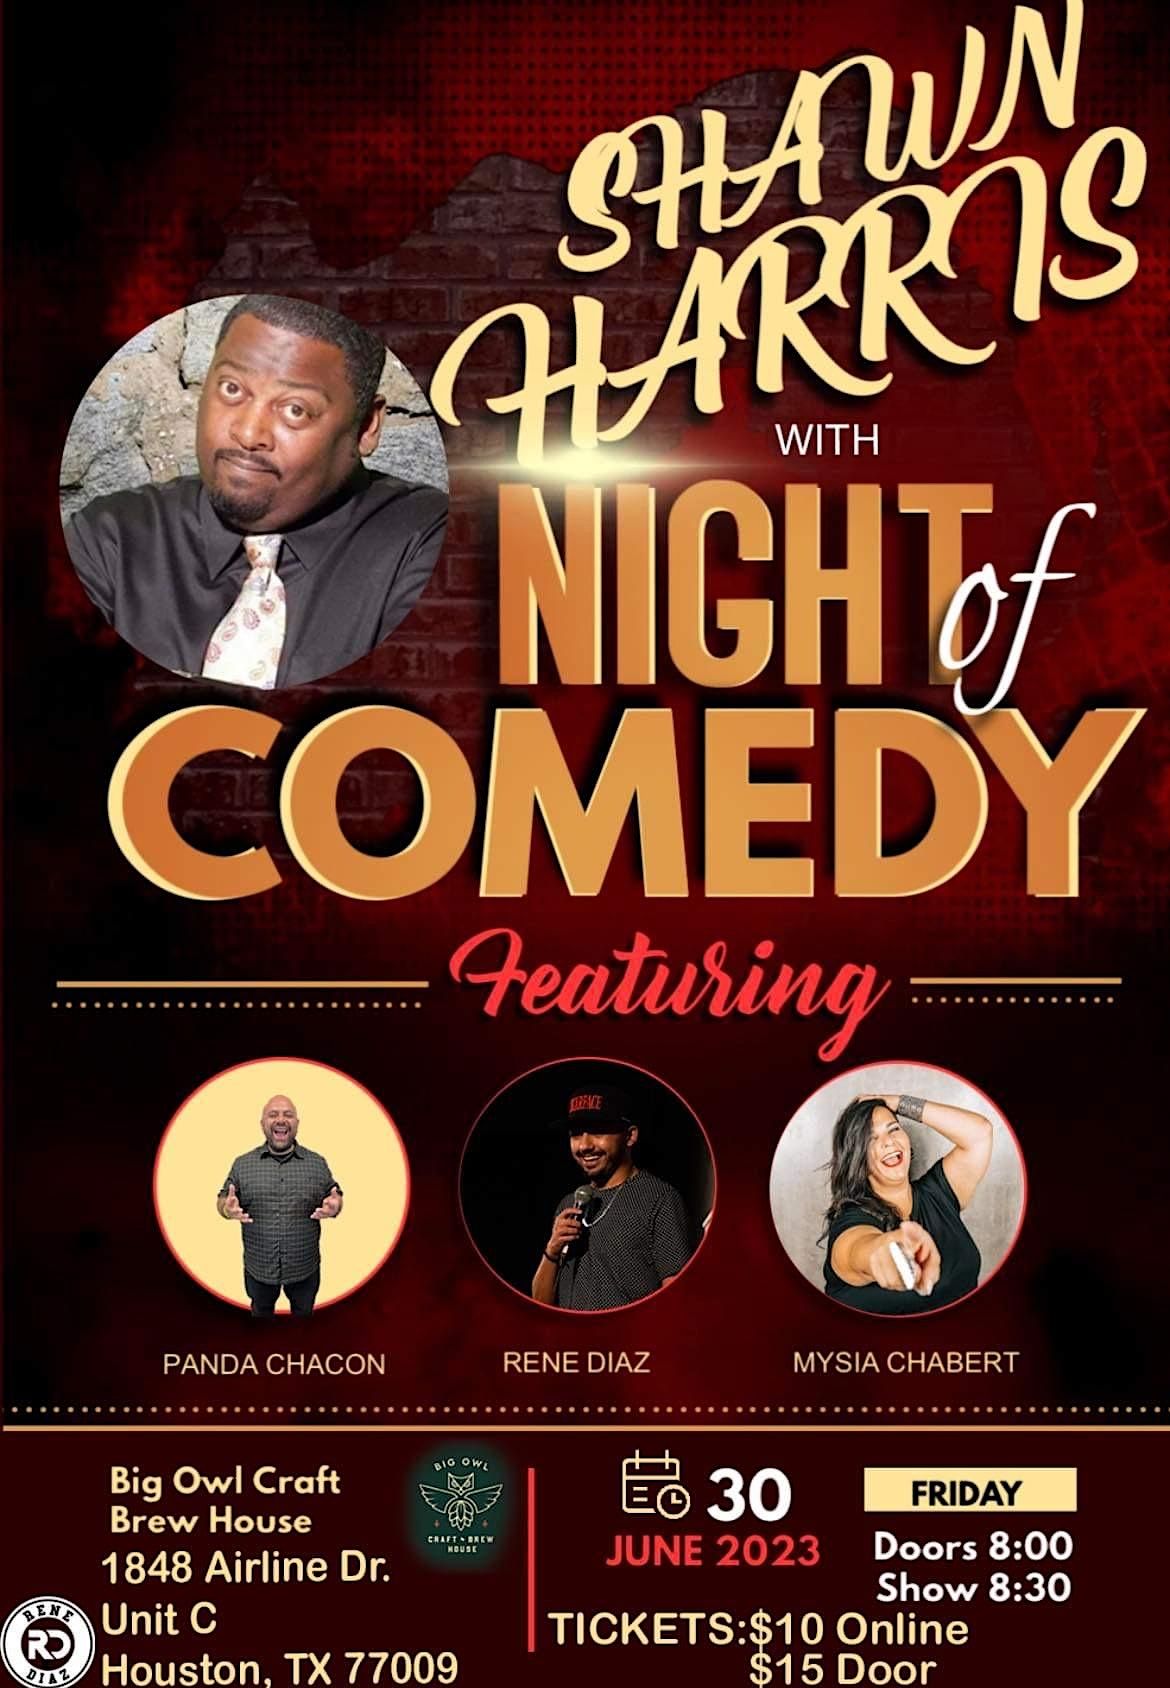 A Night of Comedy with Shawn Harris